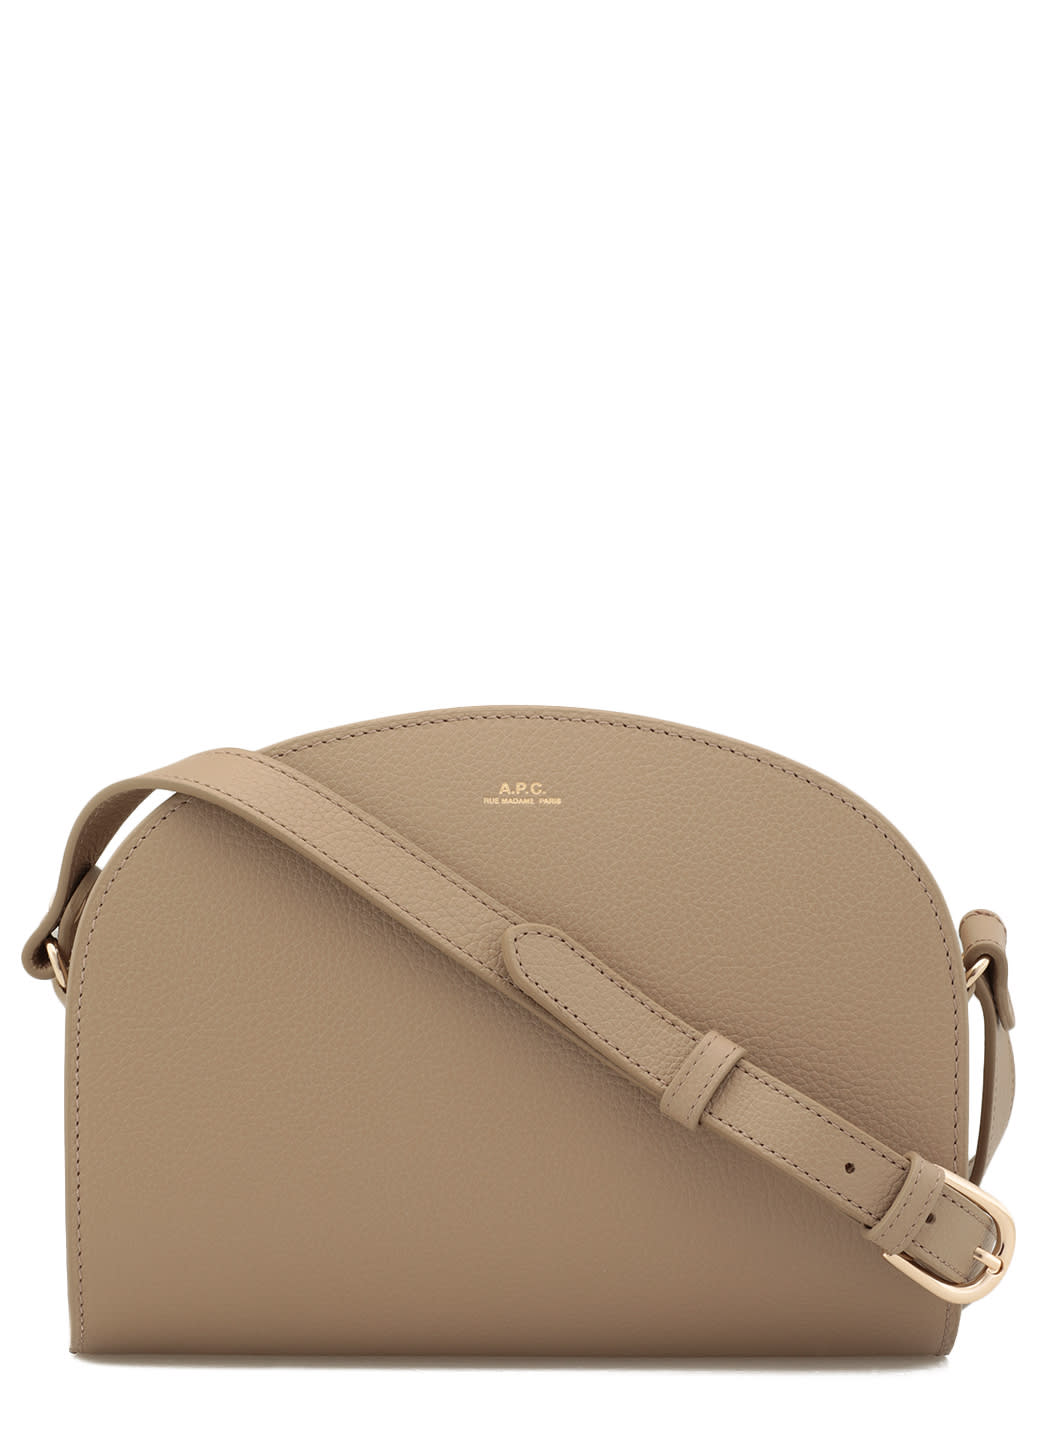 Apc Pebbled Leather Shoulder Bag In Taupe